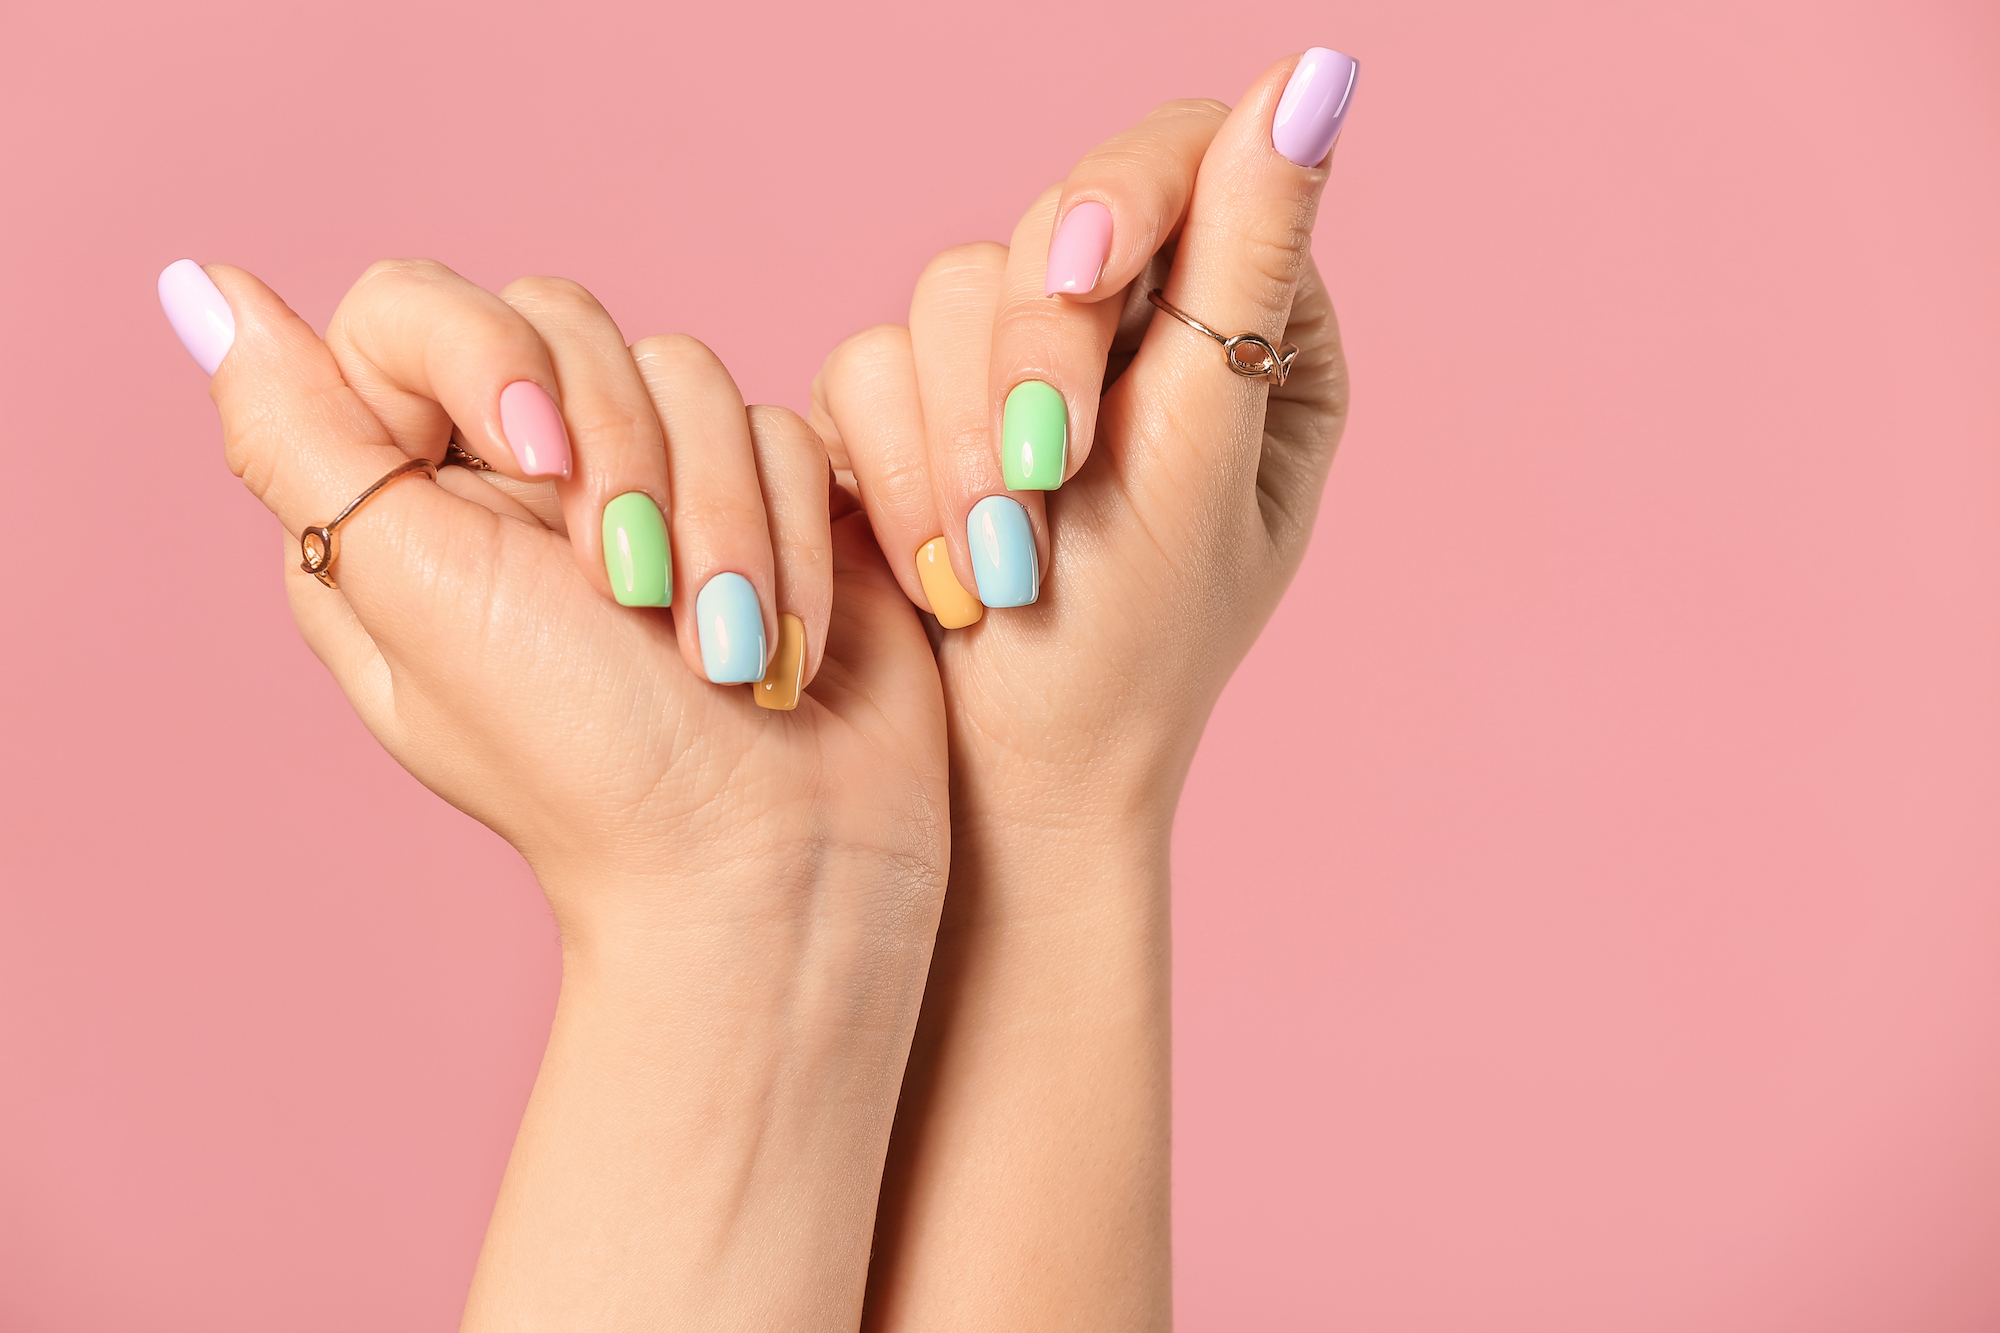 6. Trendy Nail Art Ideas with Step-by-Step Instructions - wide 3